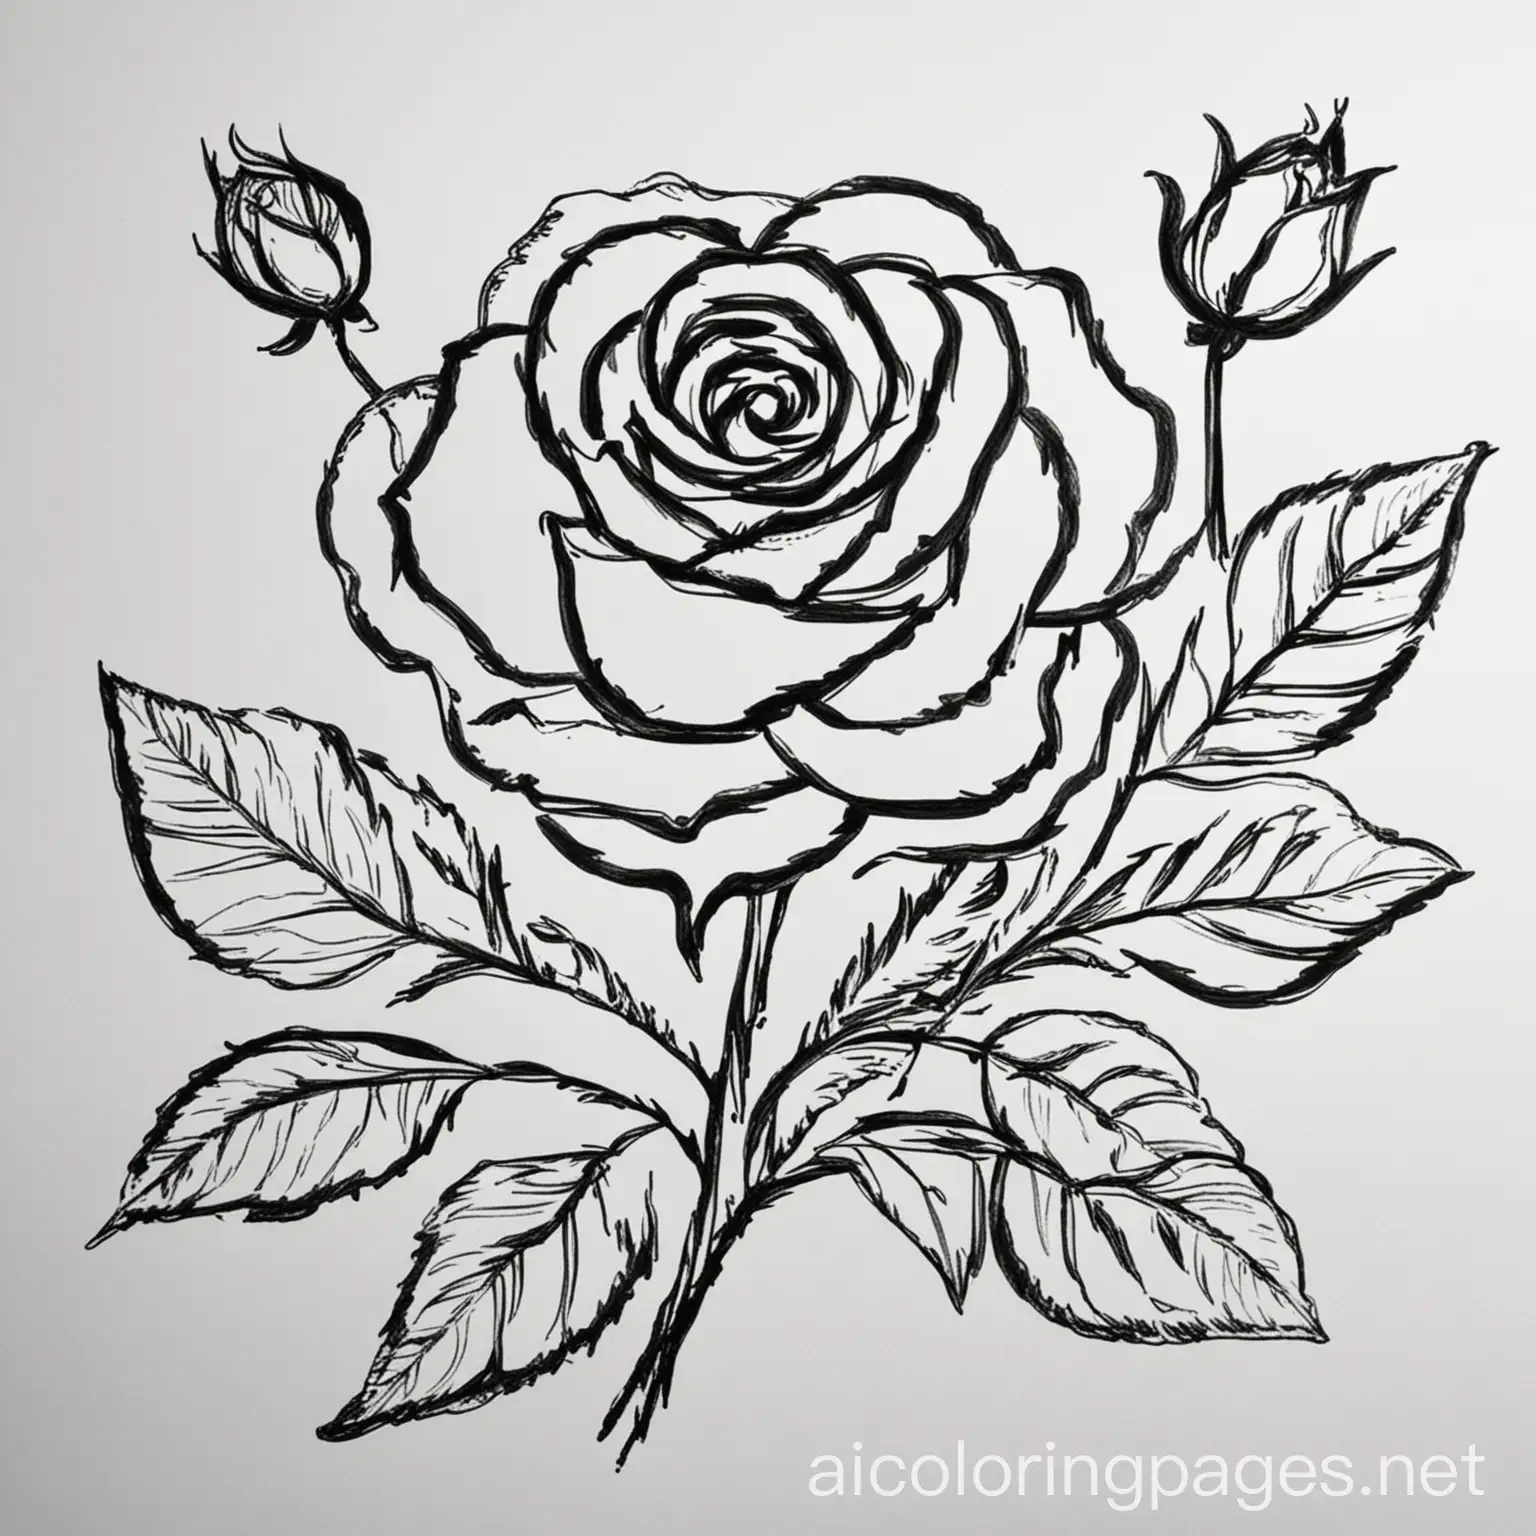 roses coloring pages , Coloring Page, black and white, line art, white background, Simplicity, Ample White Space. The background of the coloring page is plain white to make it easy for young children to color within the lines. The outlines of all the subjects are easy to distinguish, making it simple for kids to color without too much difficulty